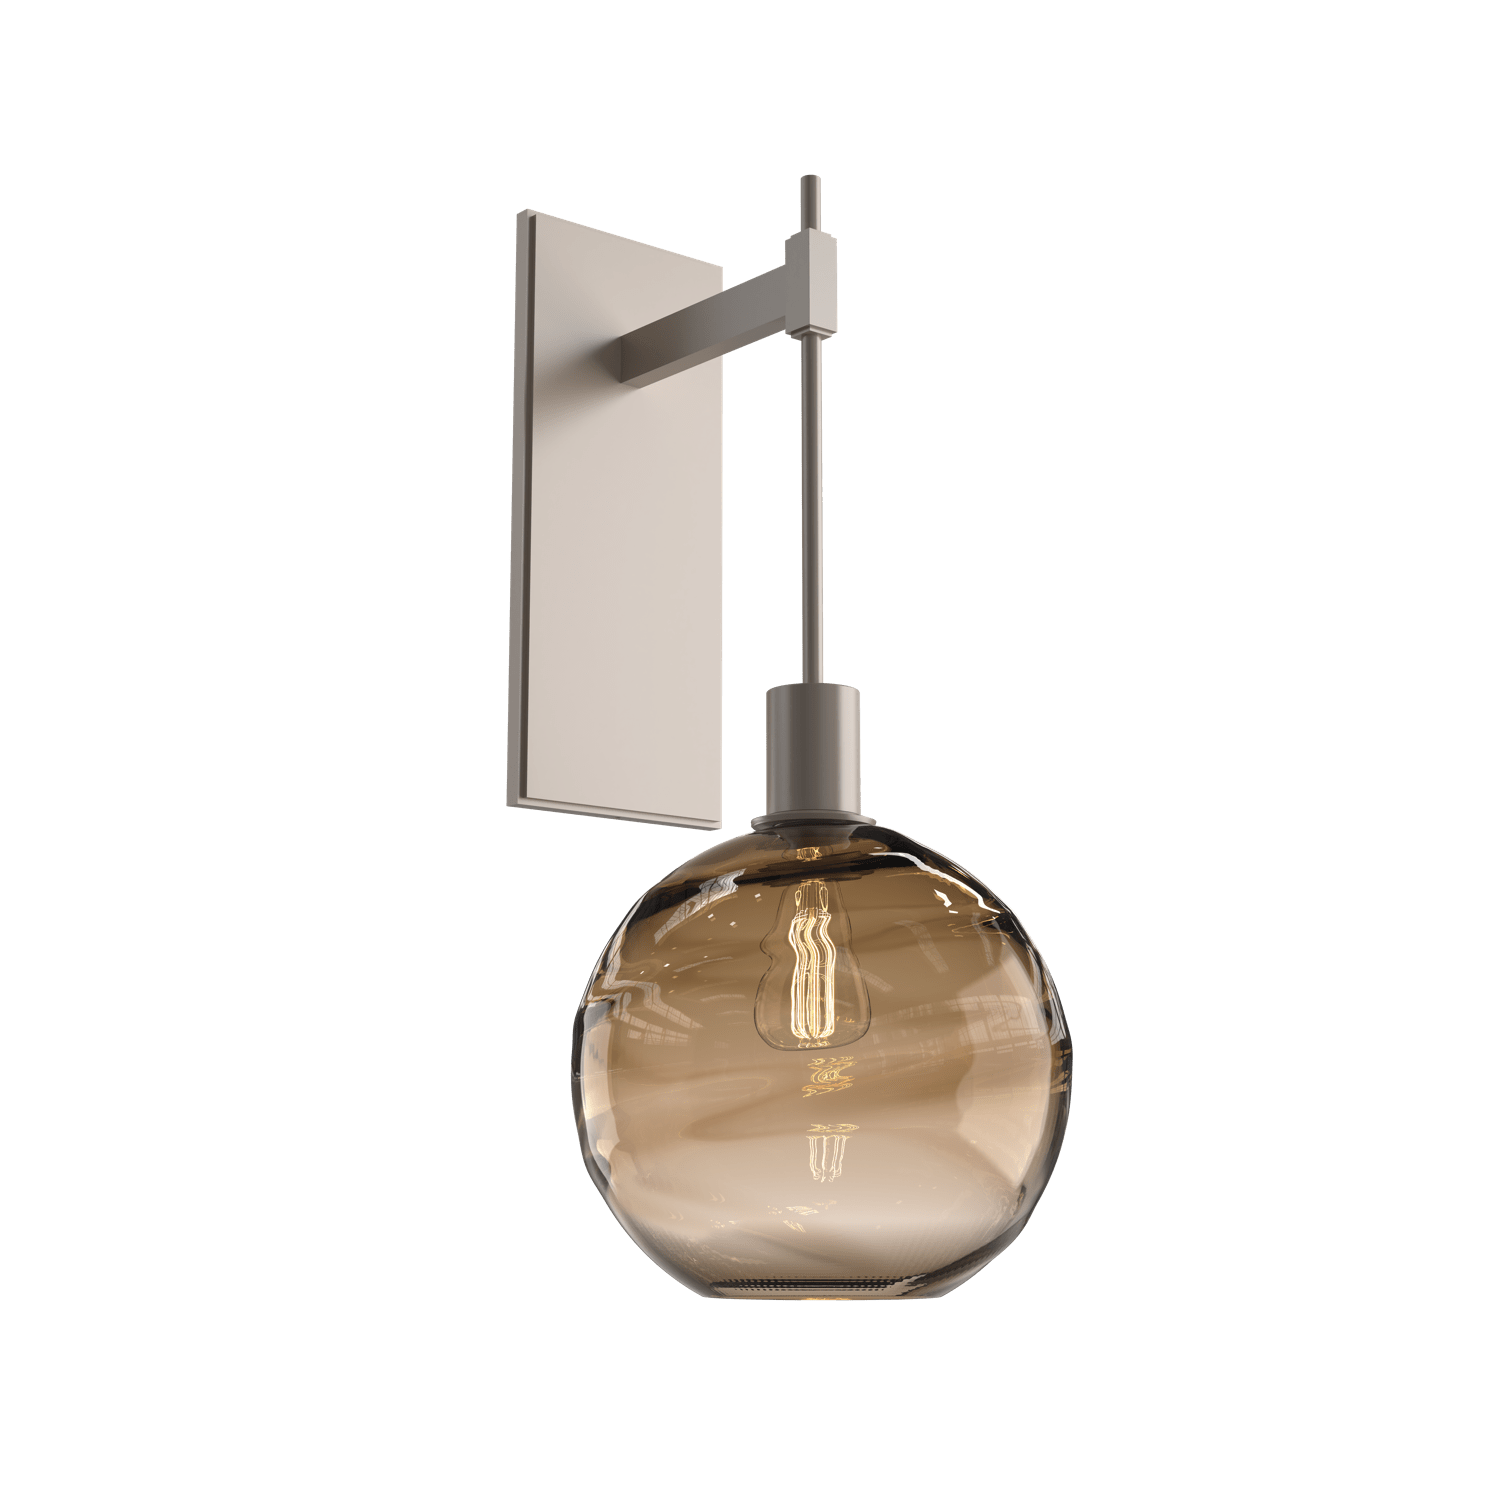 IDB0047-22-BS-OB-Hammerton-Studio-Optic-Blown-Glass-Terra-tempo-wall-sconce-with-metallic-beige-silver-finish-and-optic-bronze-blown-glass-shades-and-incandescent-lamping